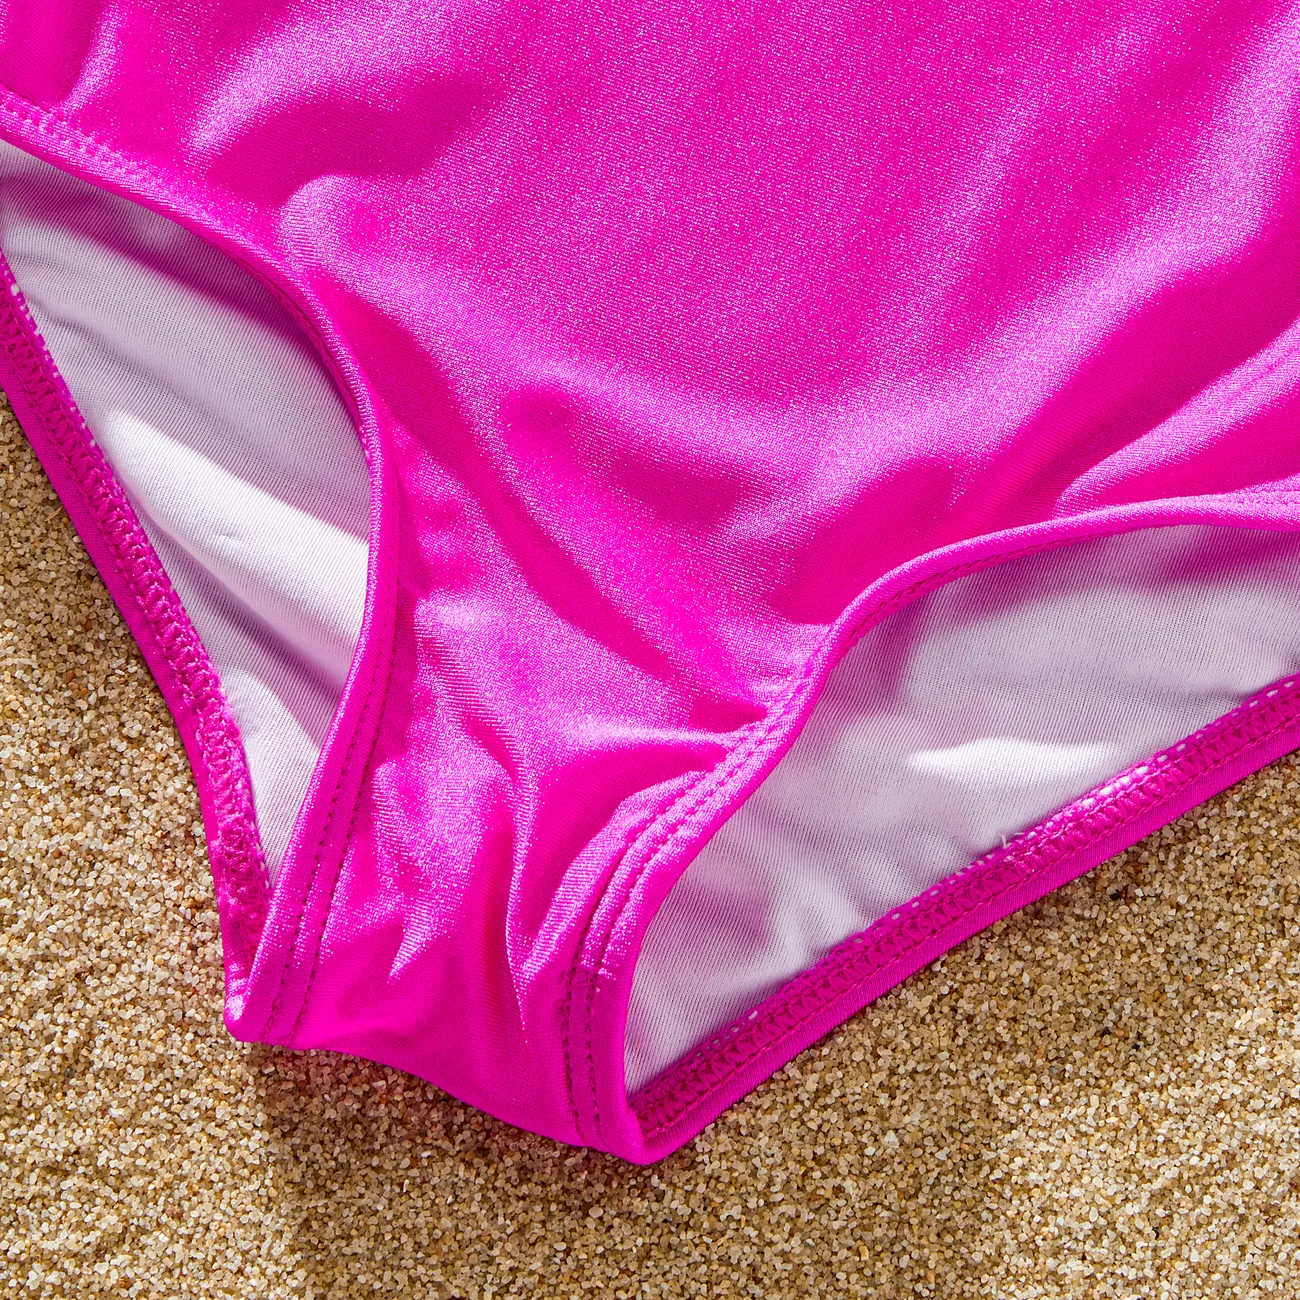 Family Matching White Drawstring Swim Trunks or Sparkling Hot Pink One-Piece Swimsuit Hot Pink big image 1